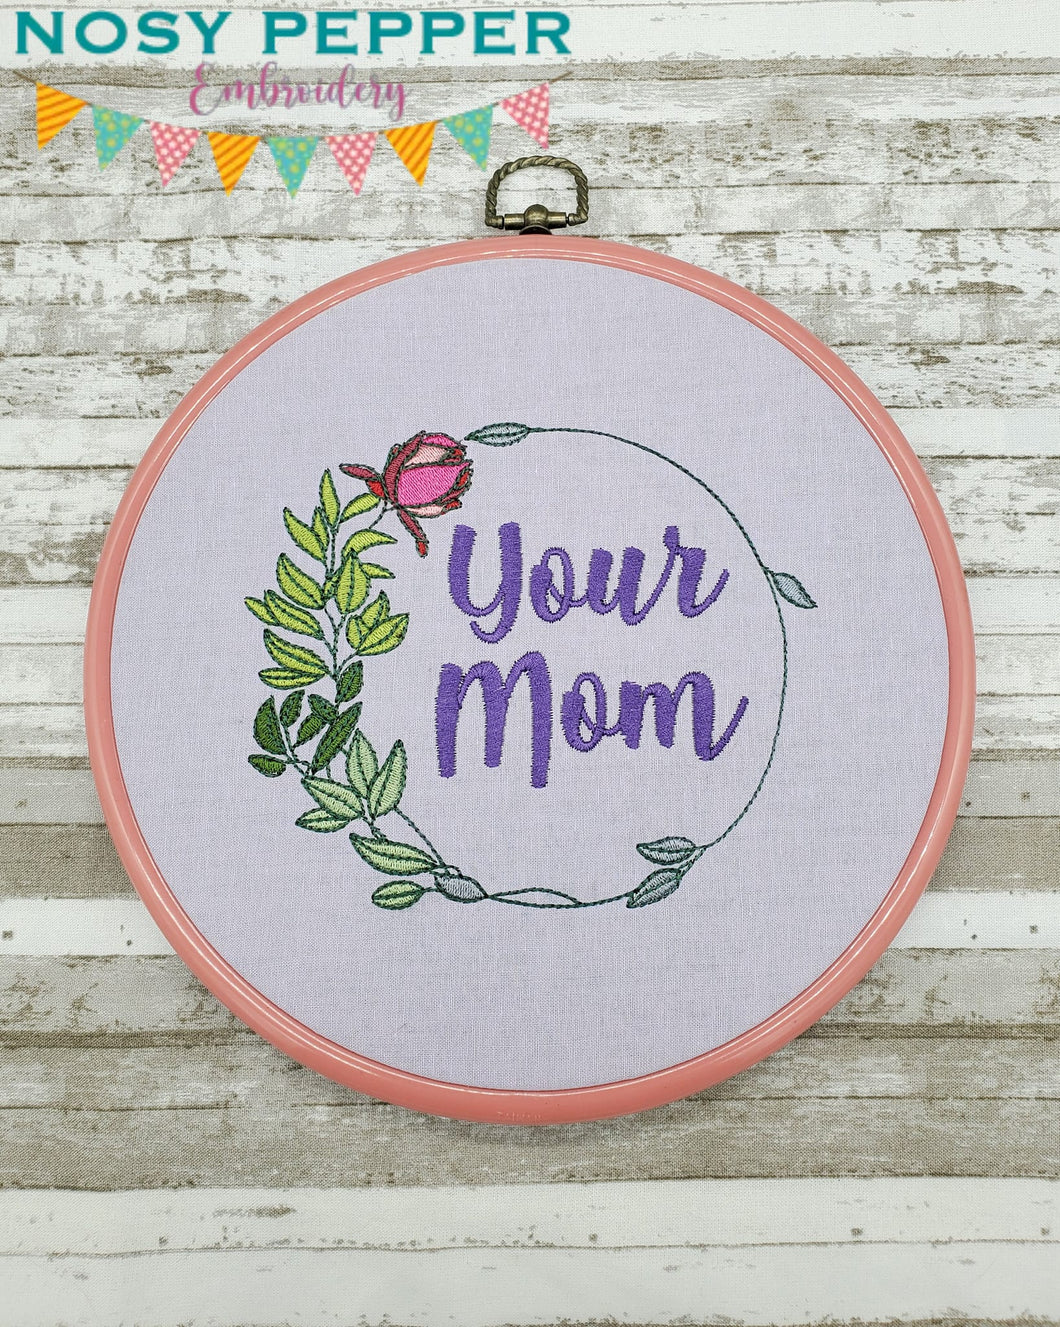 Your Mom Your Mum machine embroidery design (4 sizes and 2 versions included) DIGITAL DOWNLOAD